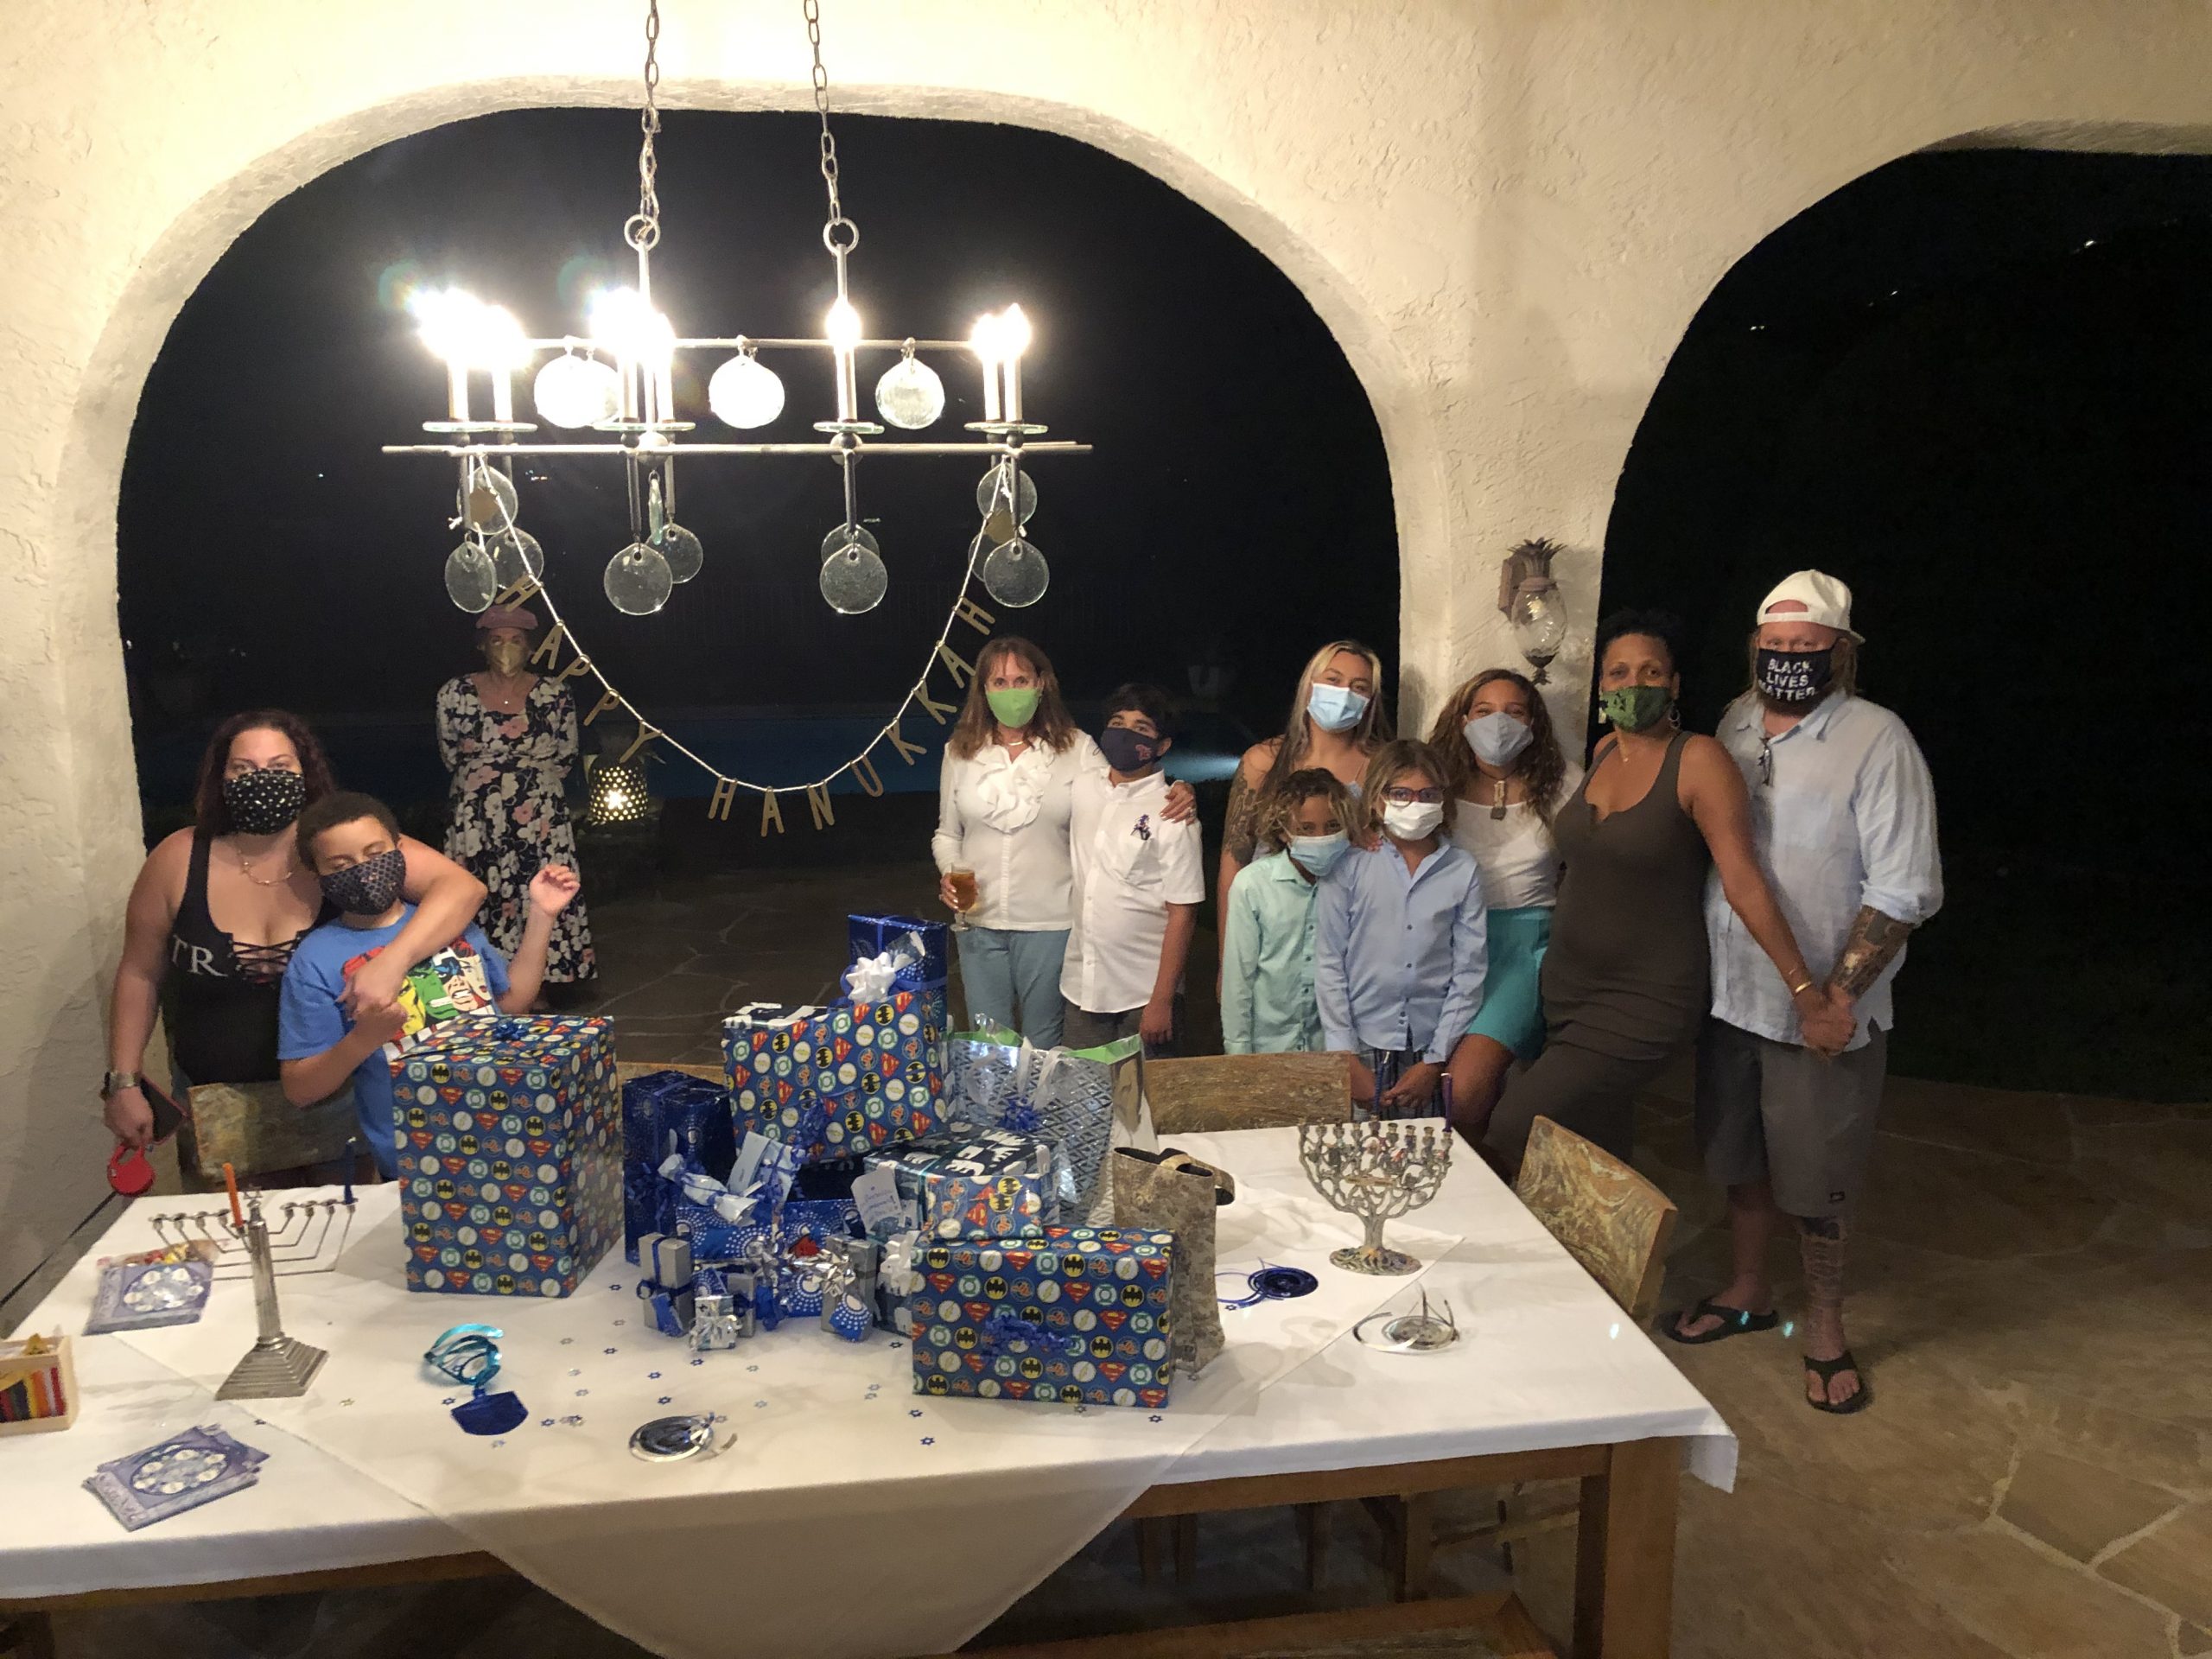 BY ROBERT LITTMAN Here is our COVID cautious Hanukkah. One daughter Tish with her family at one end. Other daughter Emma at the other and Bernice in the middle.